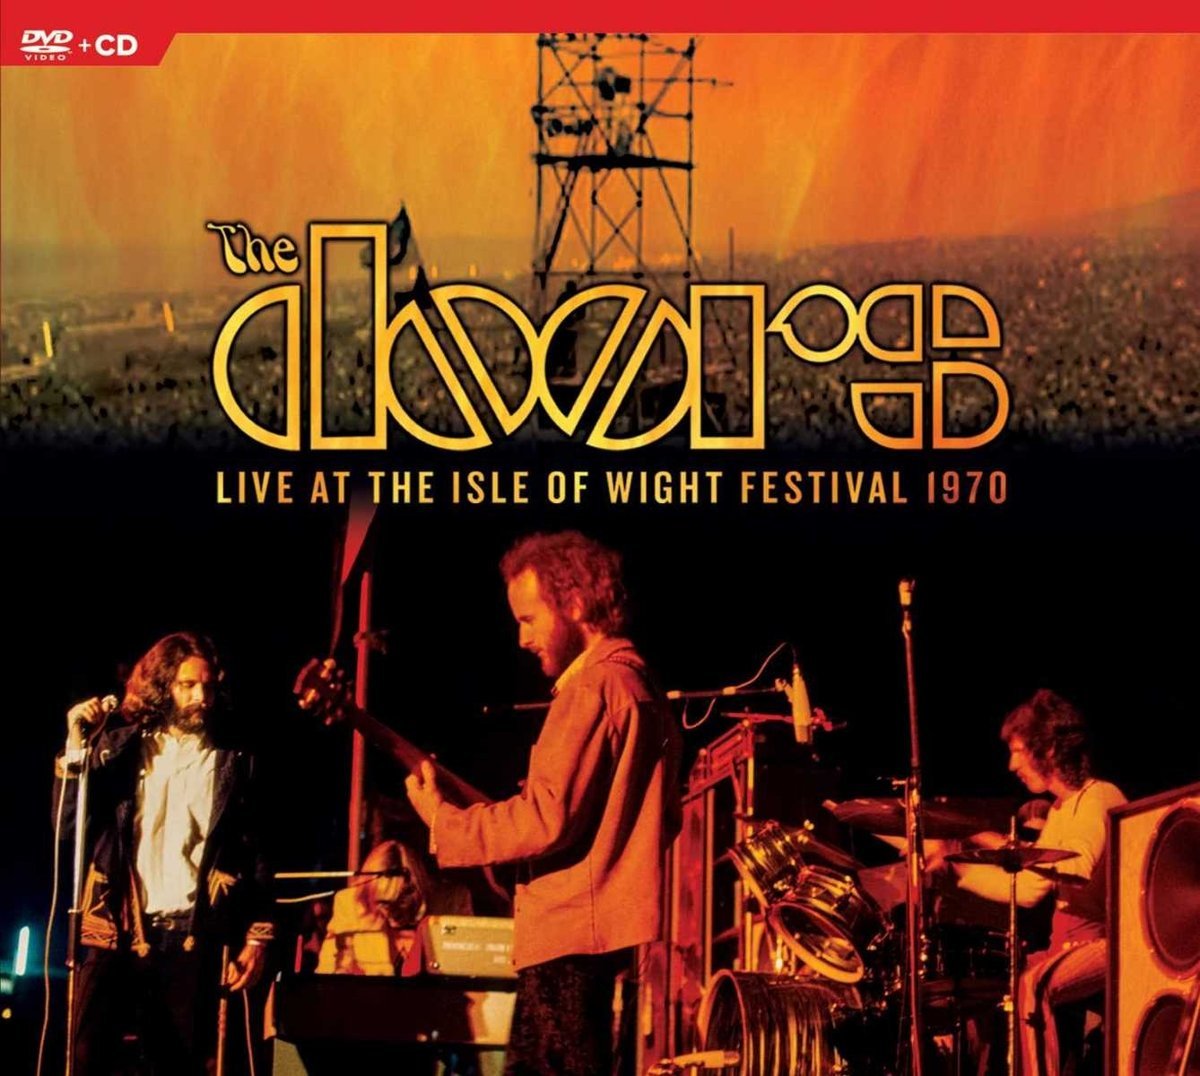 The Doors - Live At The Isle Of Wight 1970 CD/DVD